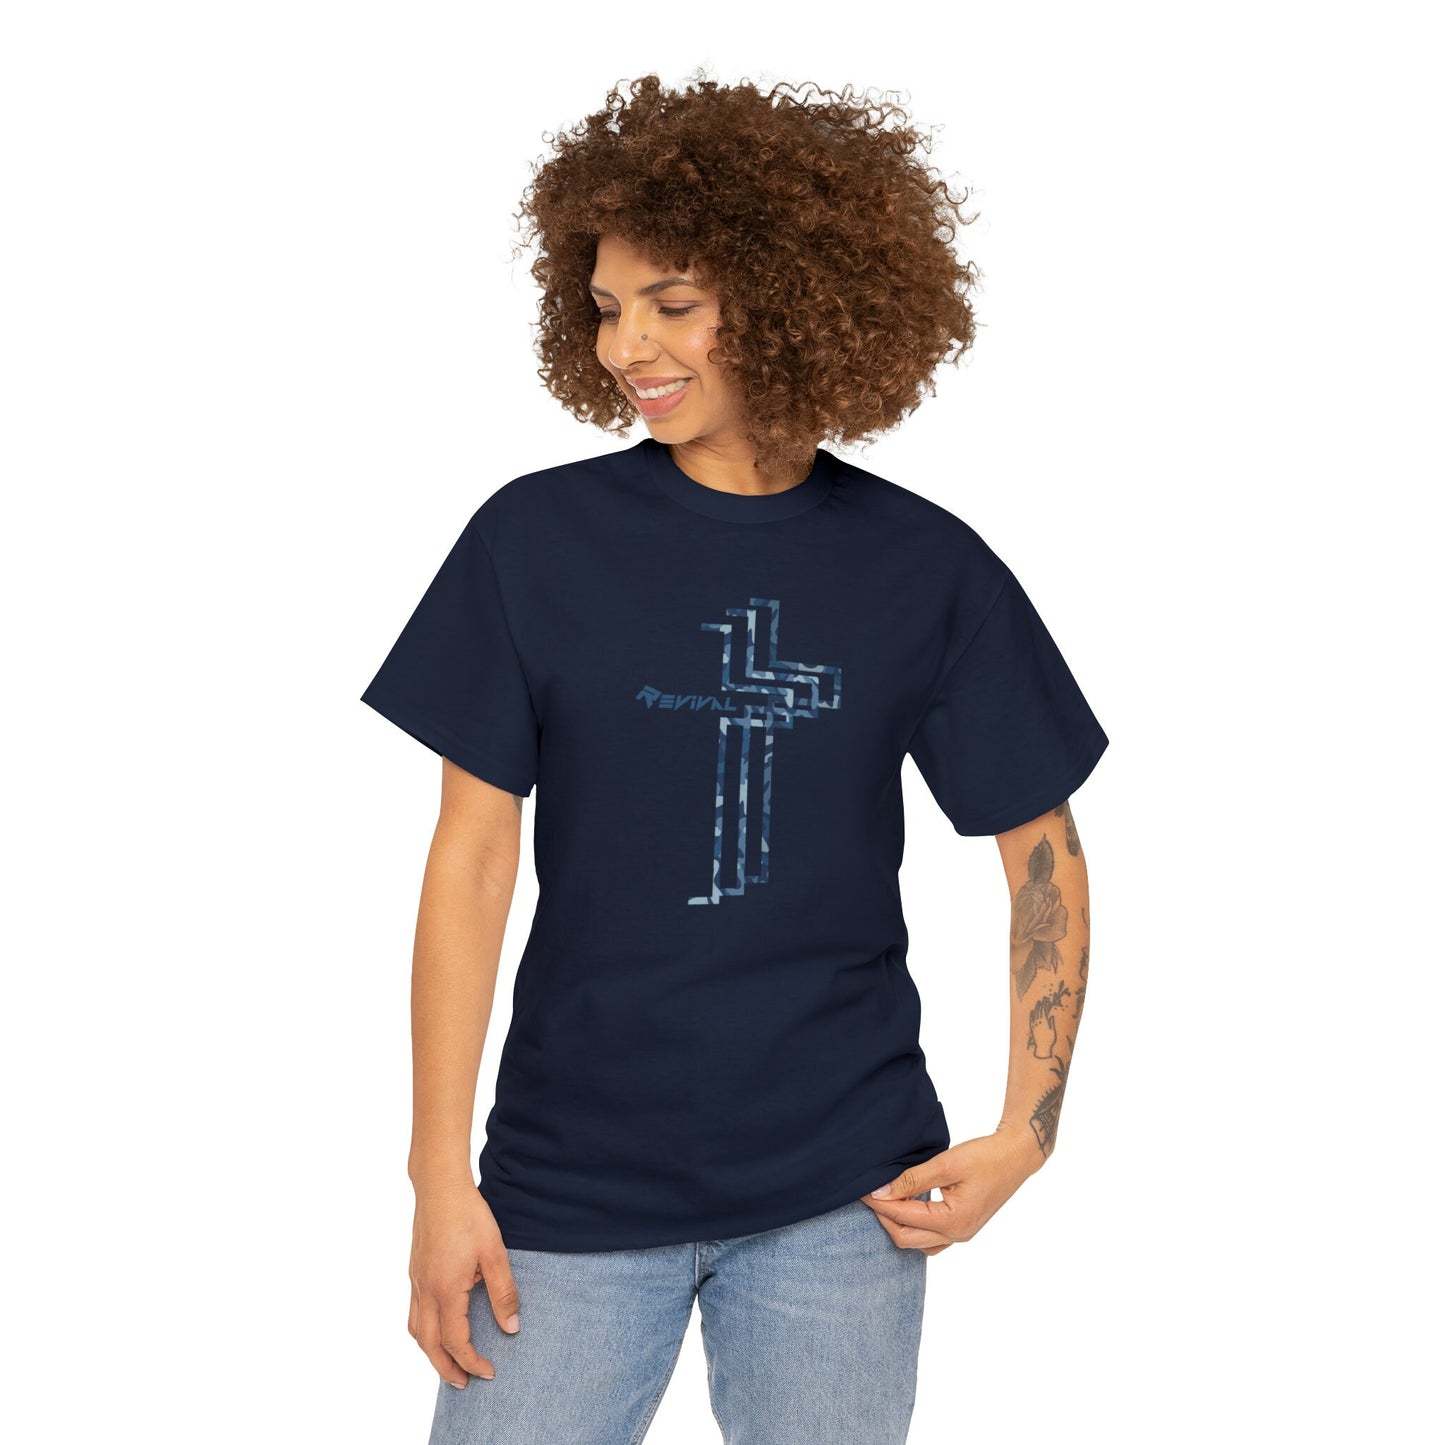 Carbon Camo Calvary Intersection by Revival Cotton T-Shirt, Women's and Men's Tee, Camouflage T-Shirt